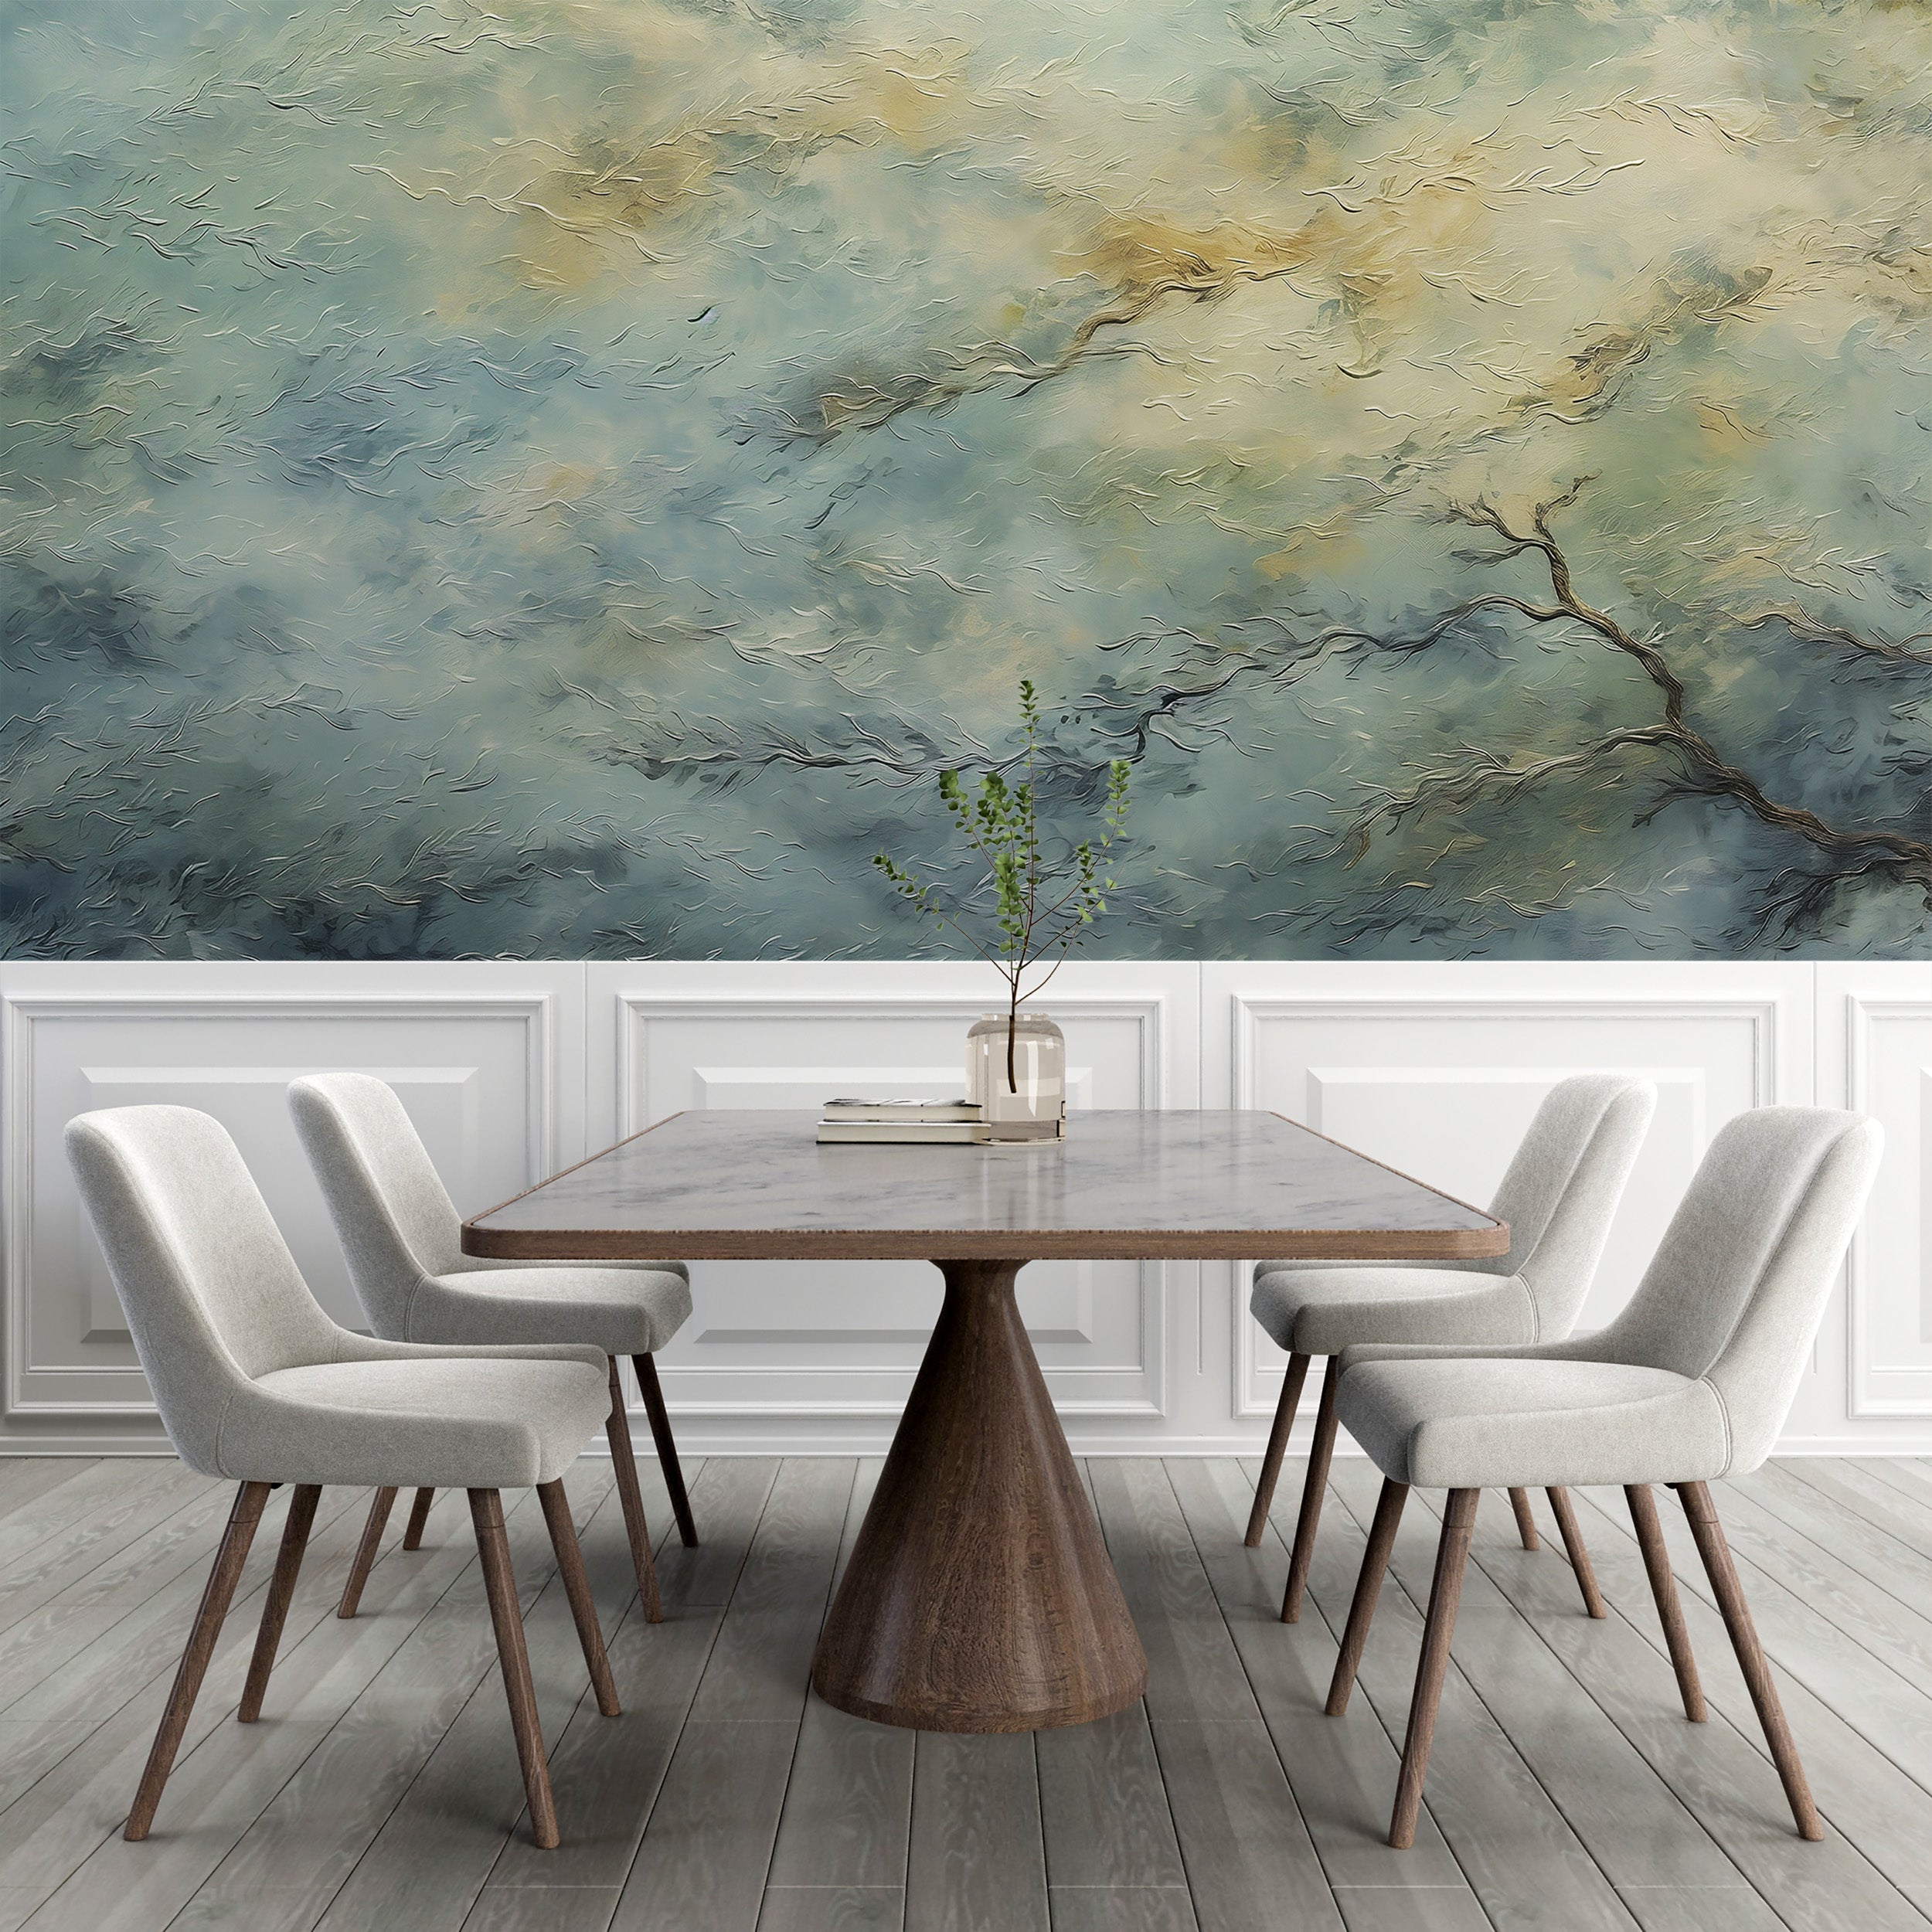 Van Gogh Inspired Wall Art Transforming Your Ambiance